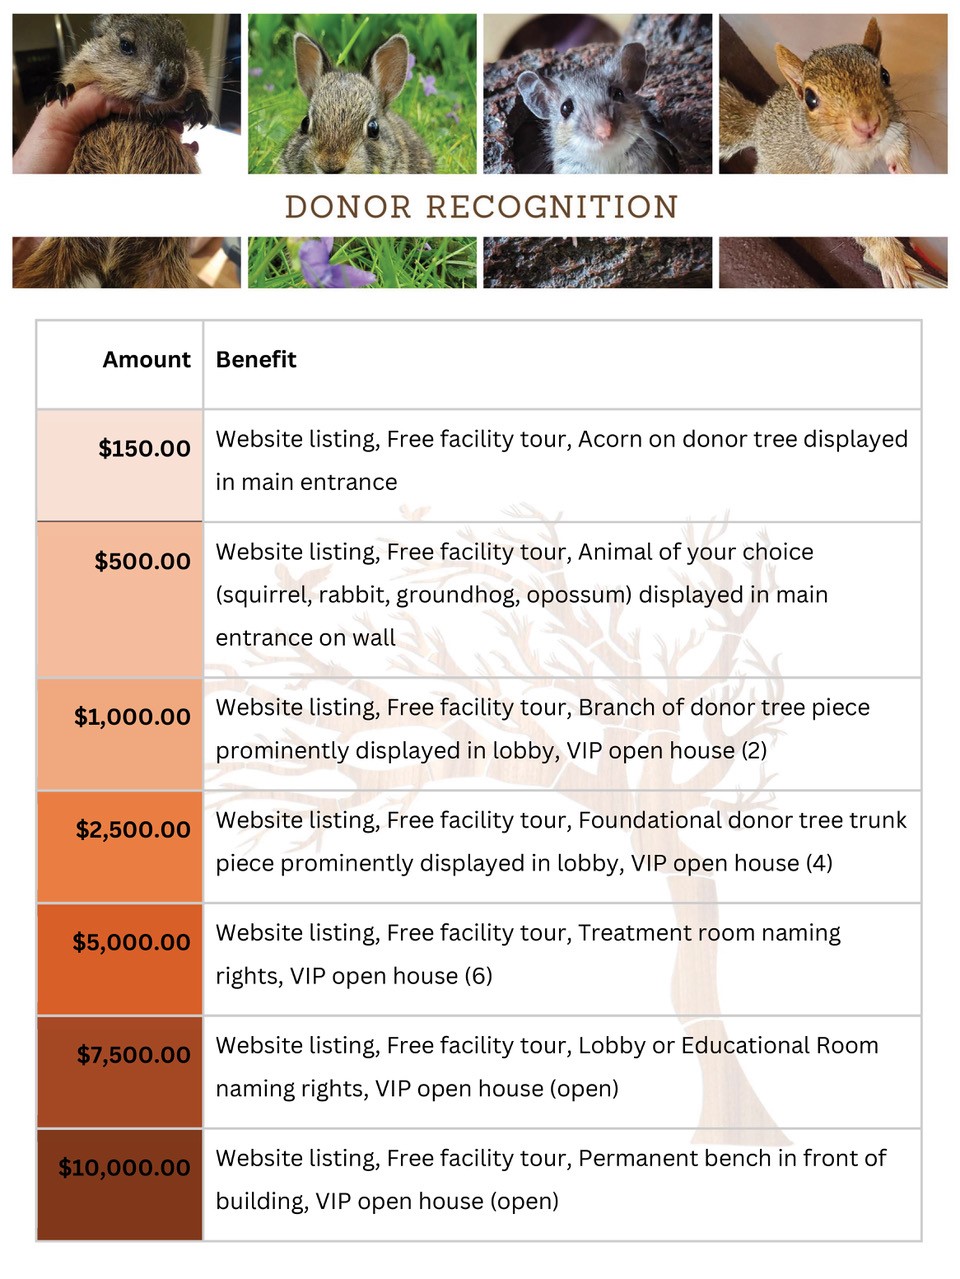 Donor Recognition Image